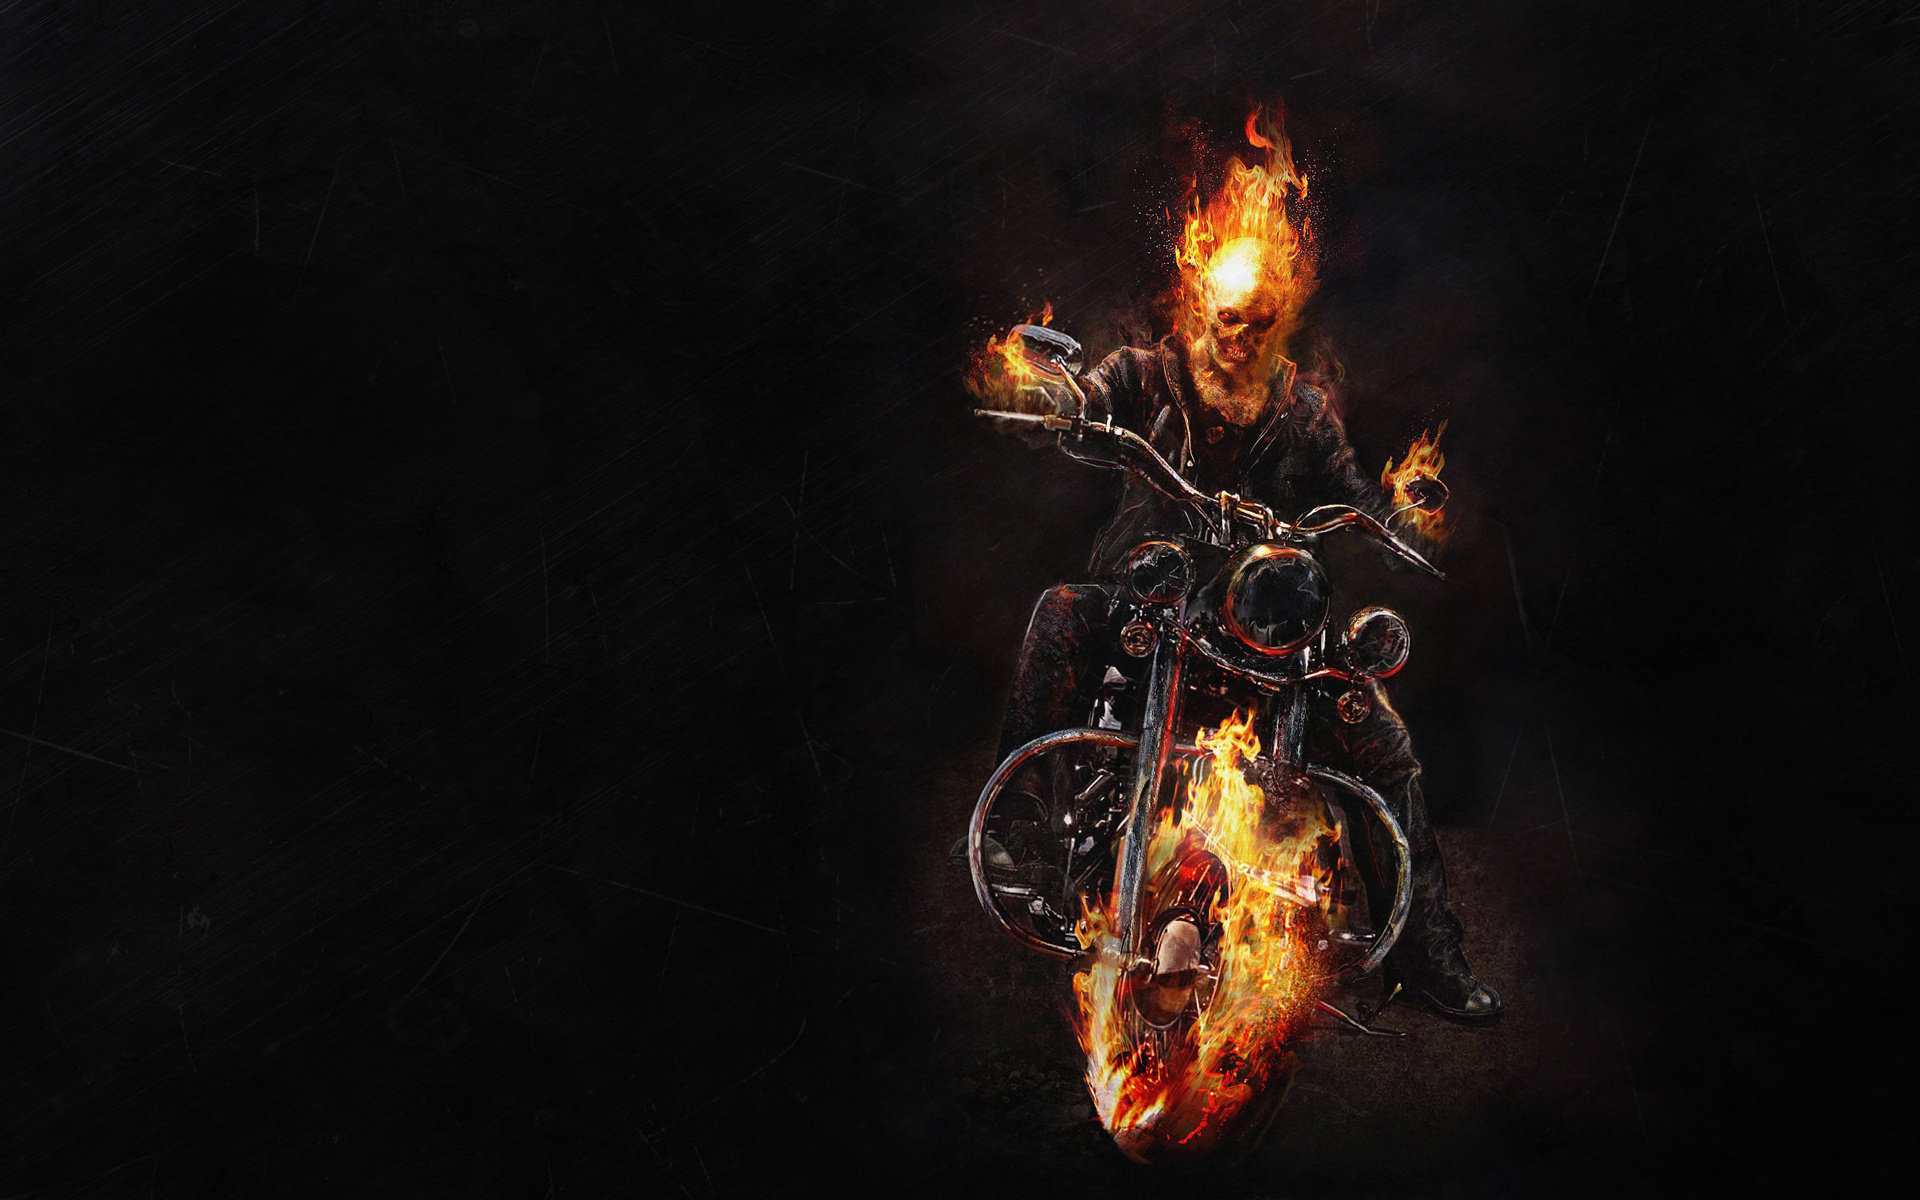  Ghost  Rider wallpapers  HD  for desktop backgrounds 